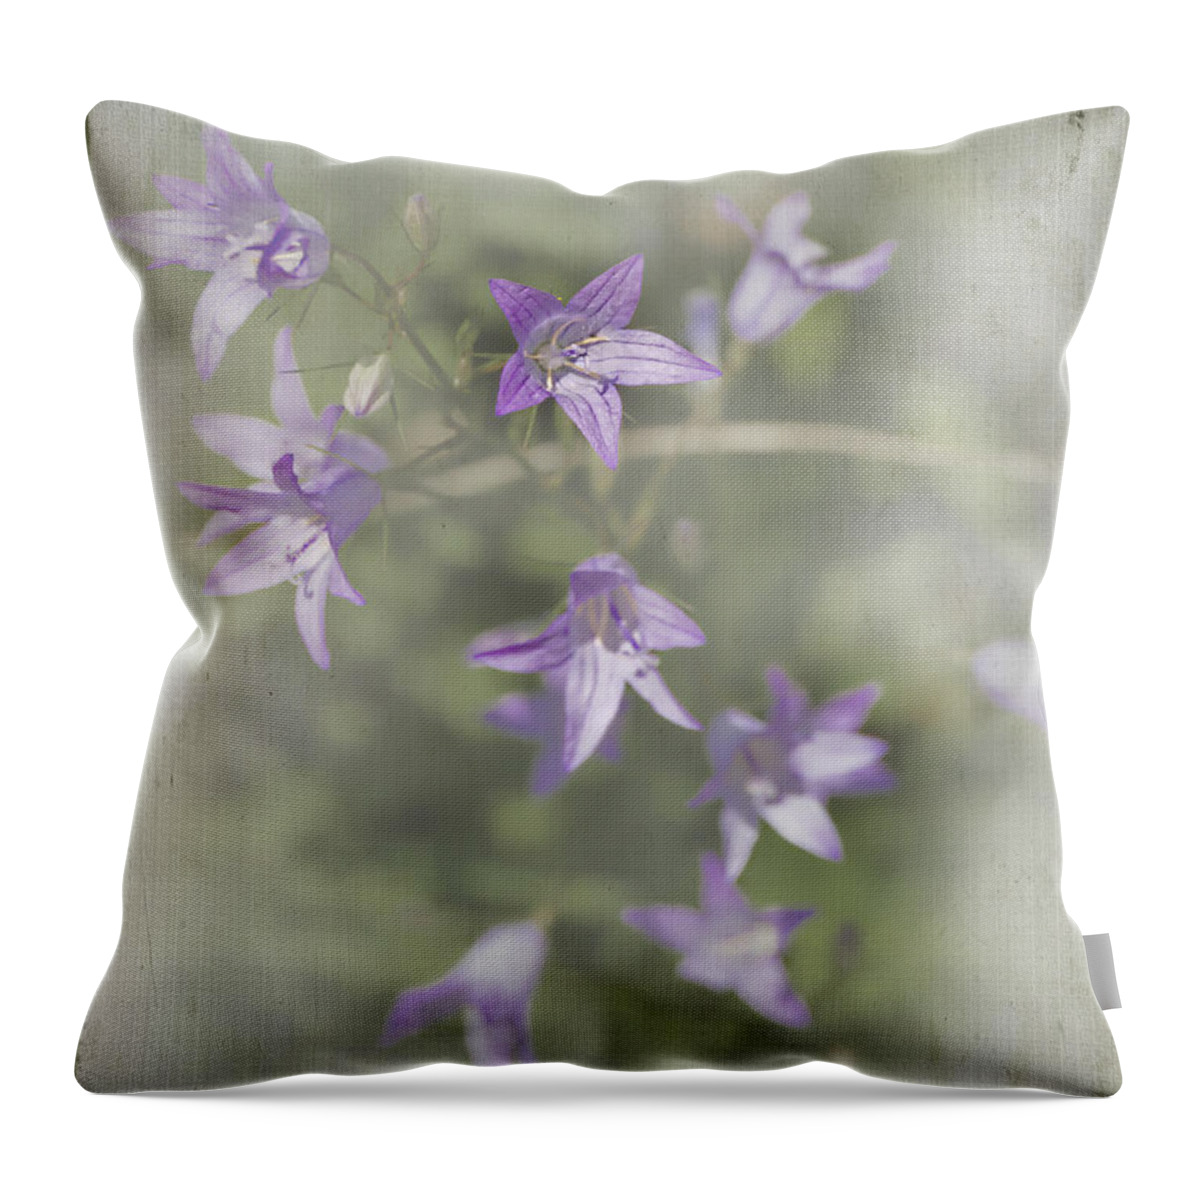 Flower Throw Pillow featuring the photograph Dainty Purple Flowers by Elaine Teague